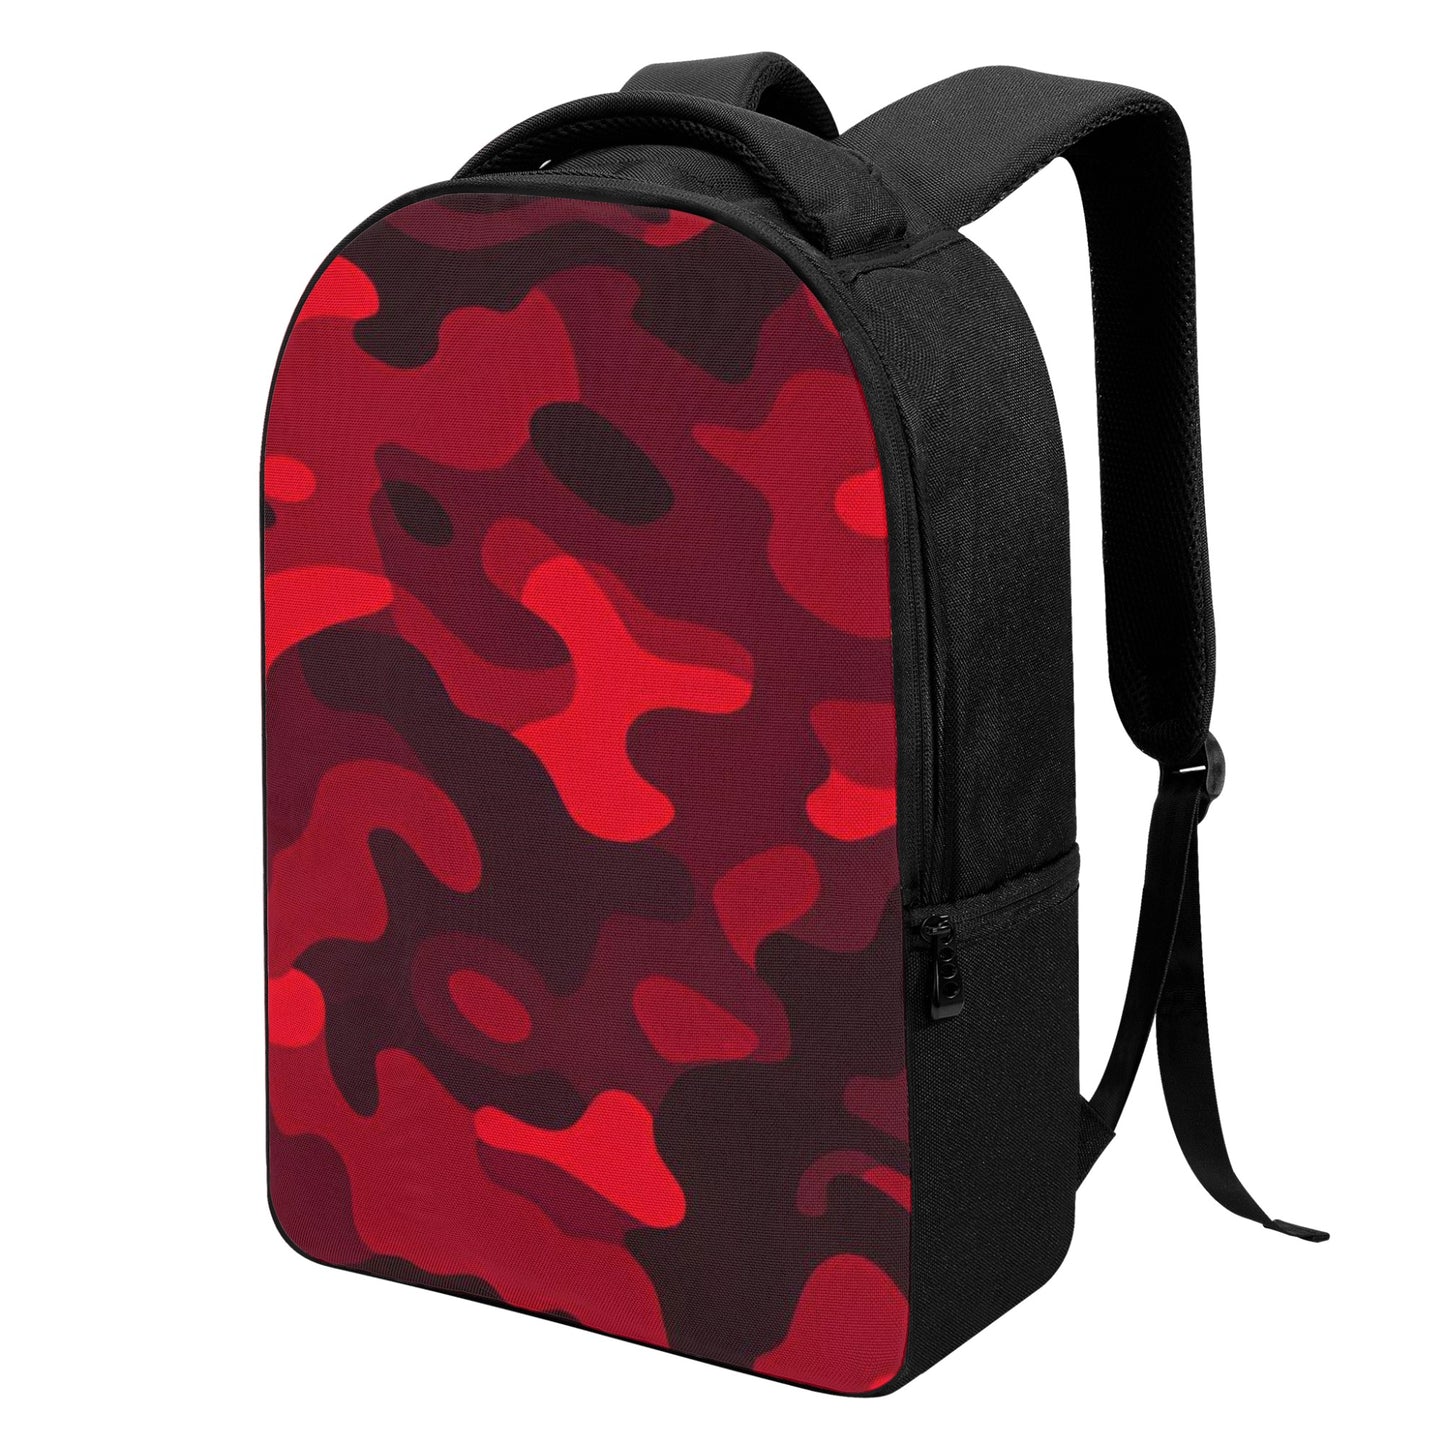 The B.E. Style Brand_Red Camo Pack